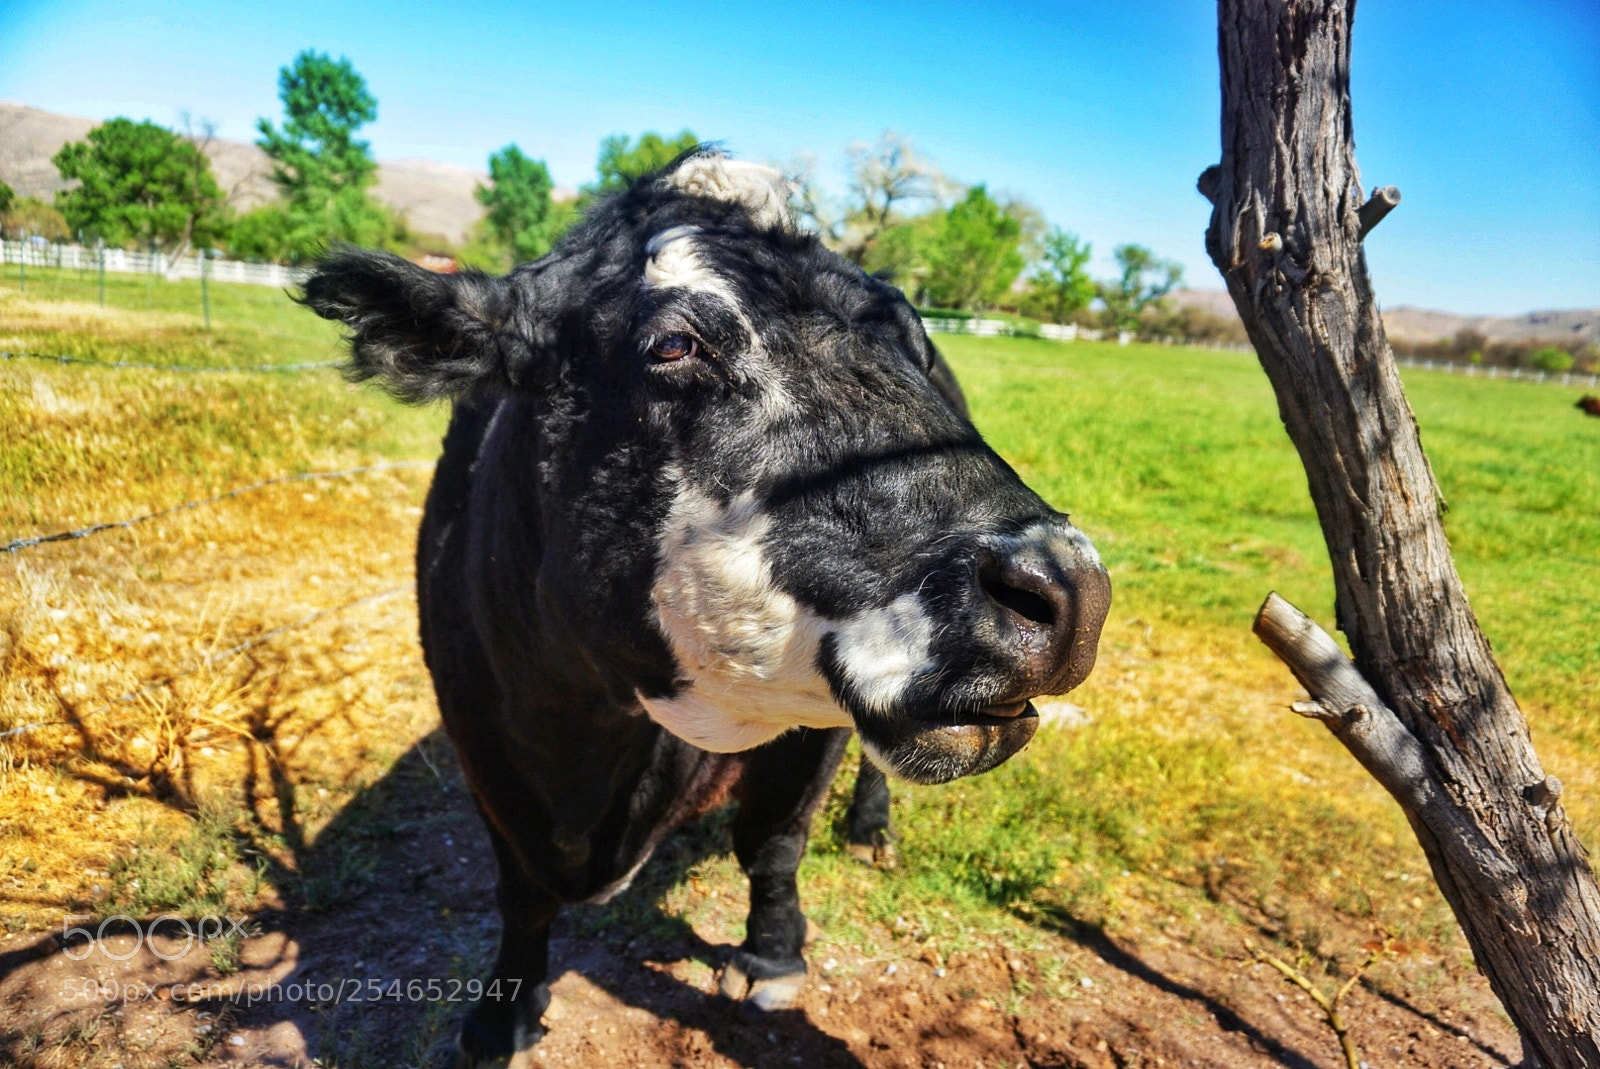 Sony a5100 sample photo. Cow photography